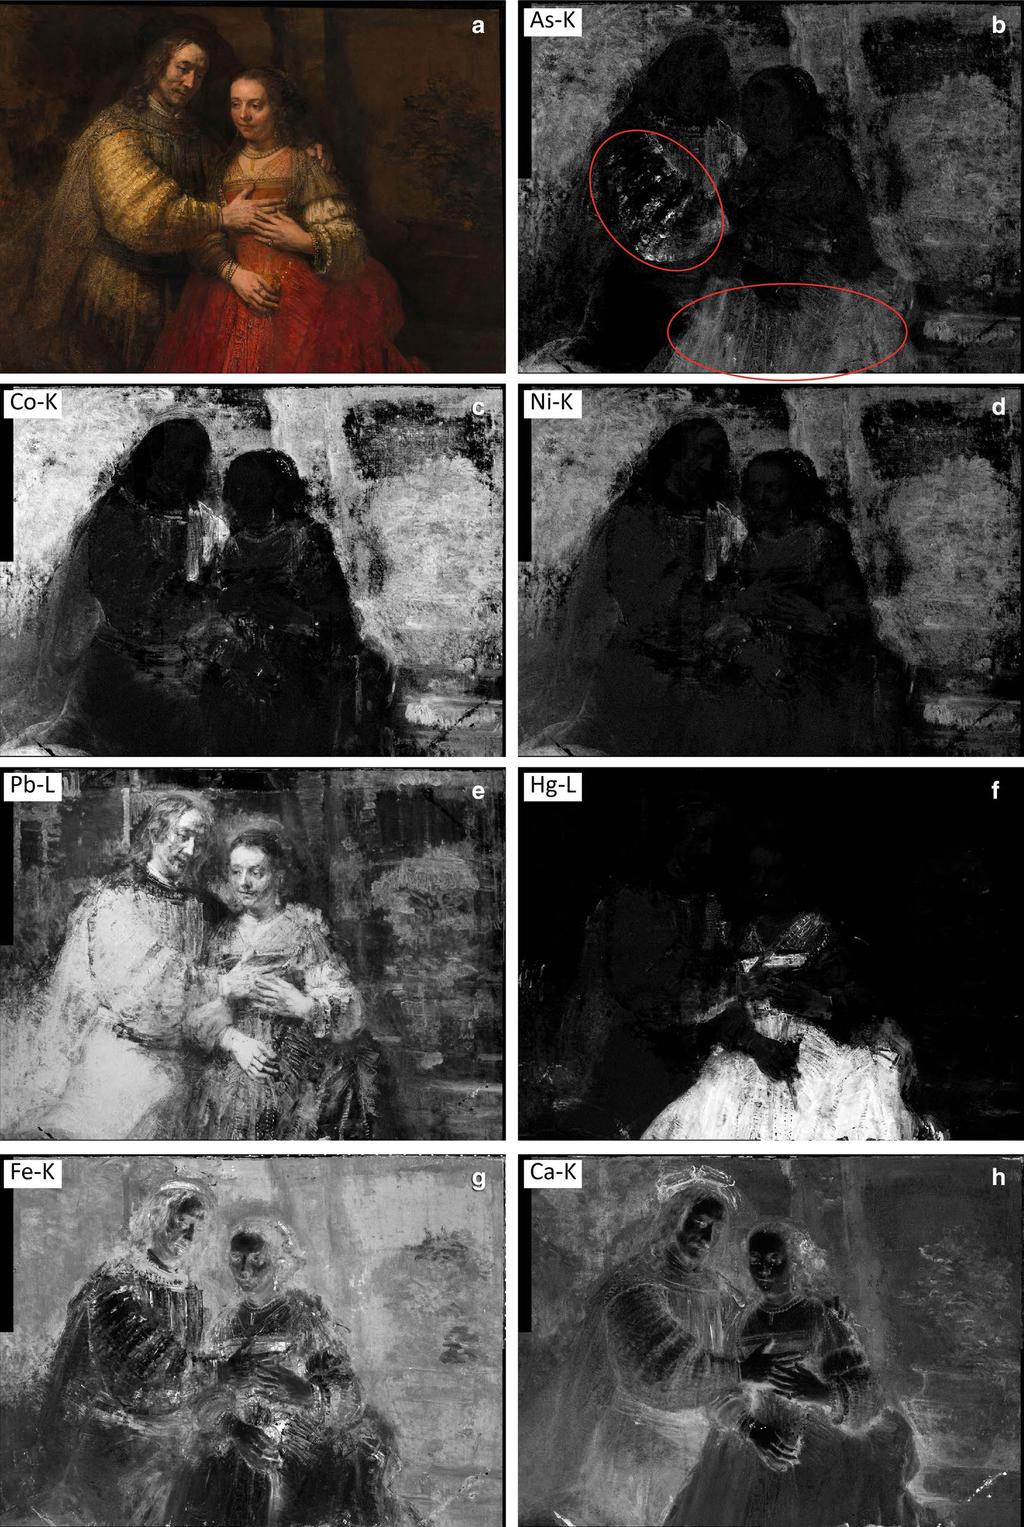 Page 3 of 13 Fig. 1 Rembrandt, Portrait of a Couple as Isaac and Rebecca, known as The Jewish Bride, c. 1665, oil on canvas (lined), 121.5 166.